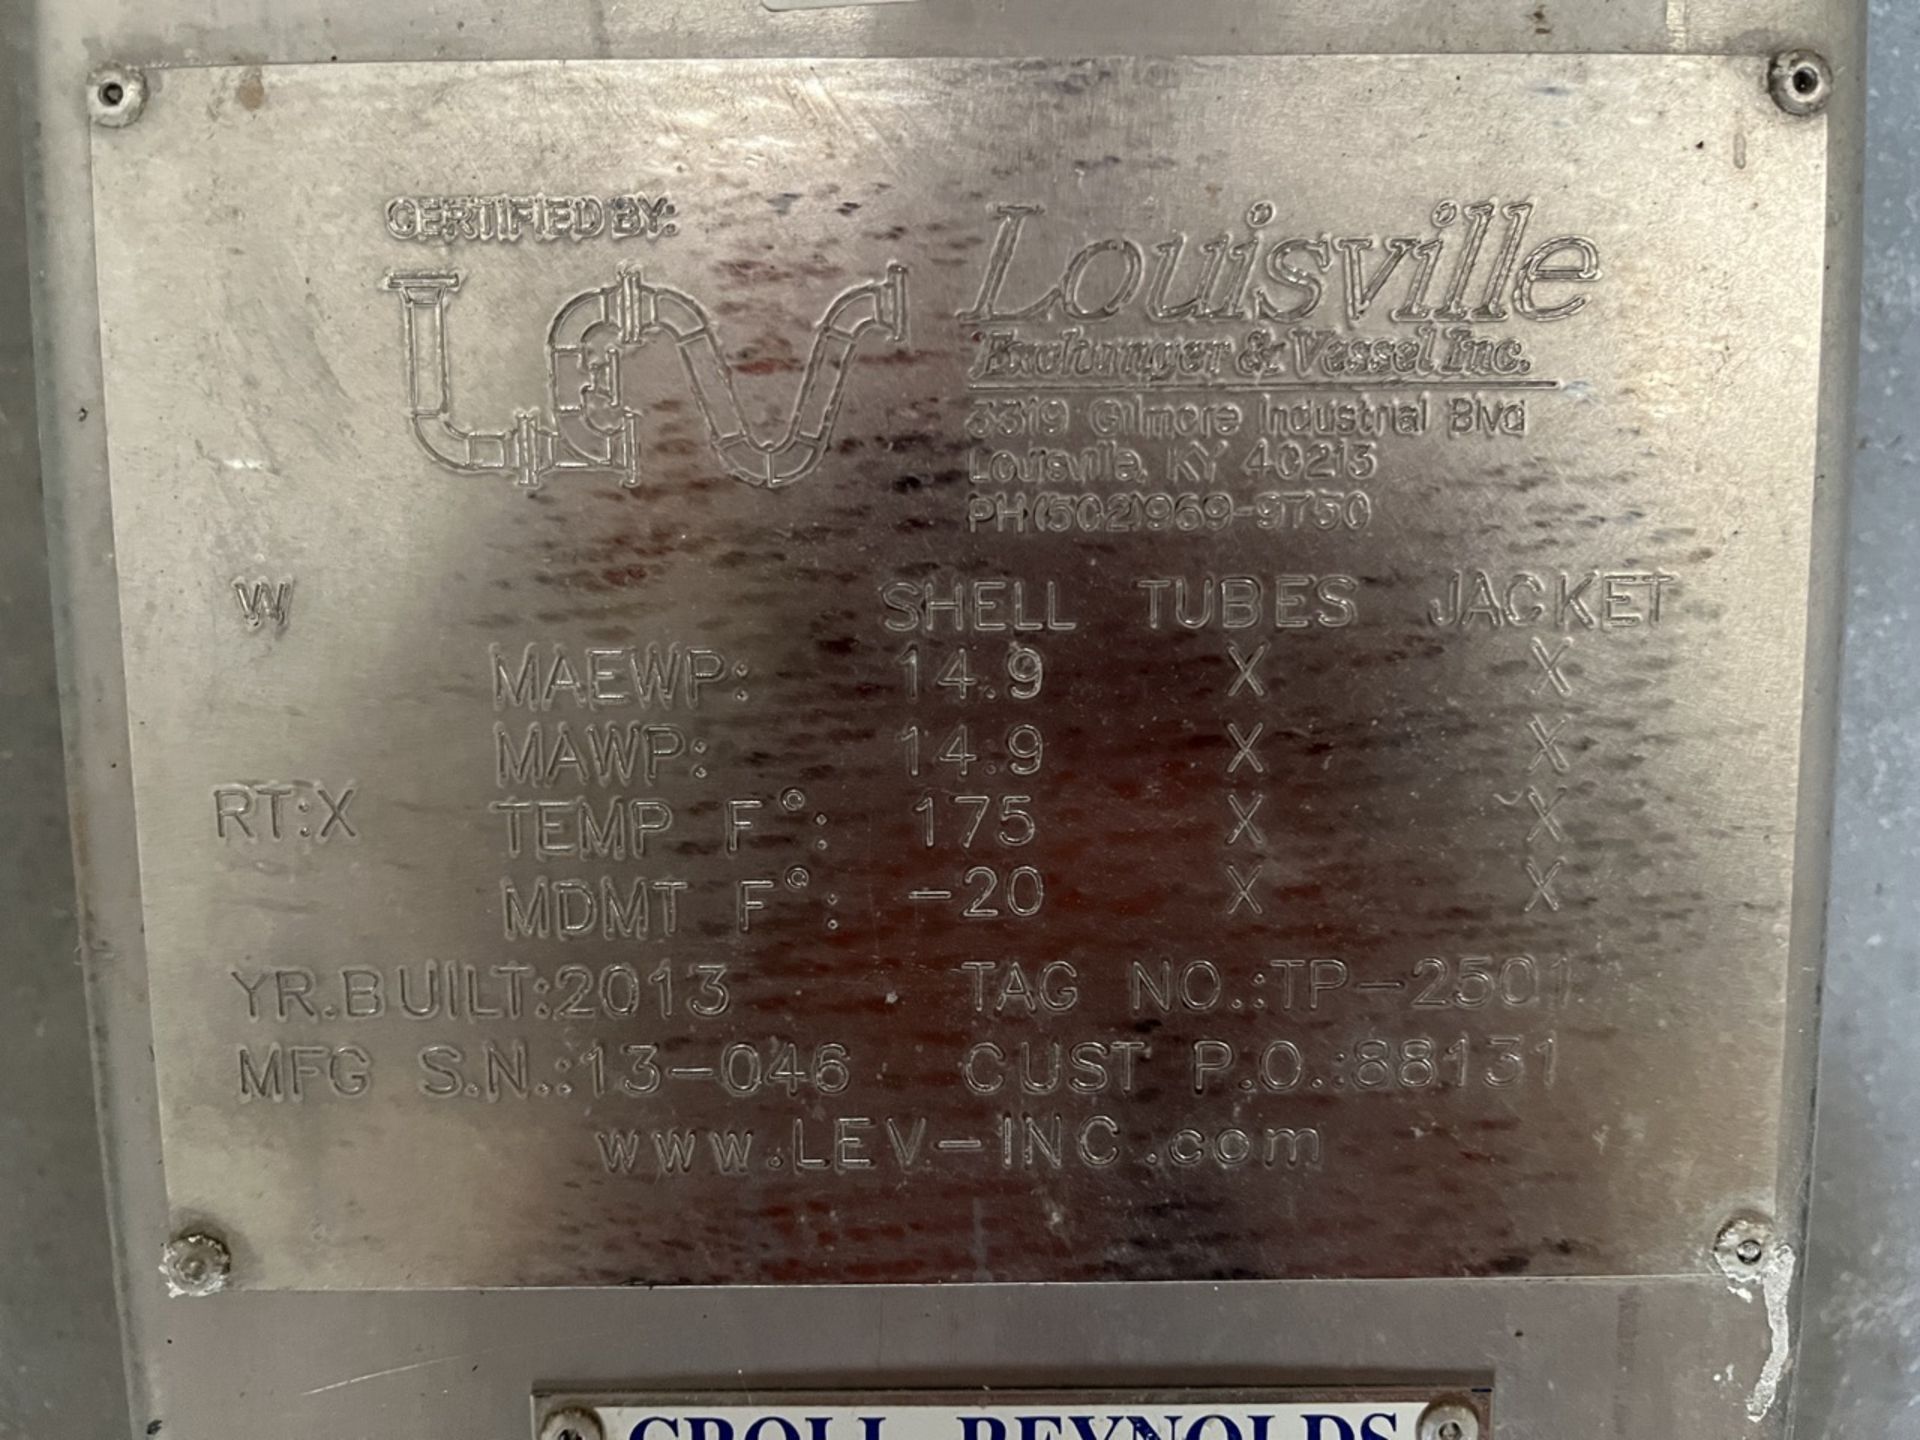 LOUSVILLE stainless steel tank for high temperatures, Series 13-046, range from -20 F° to 175 F°, y - Image 12 of 16